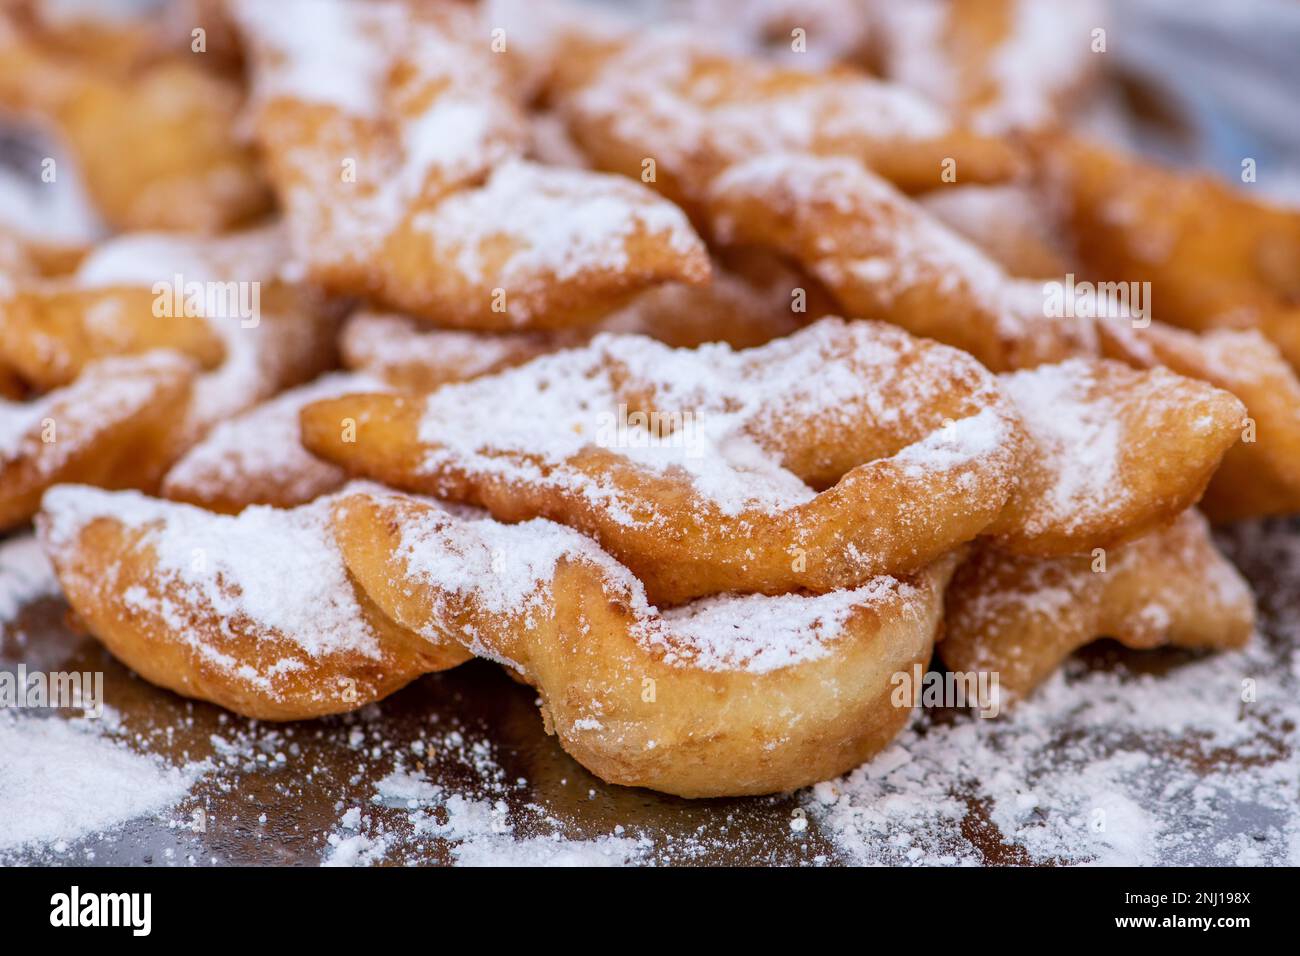 Fried pastrie of Carnival, strips of fried dough typically made on Mardi Gras covered by powdered sugar, close up Stock Photo